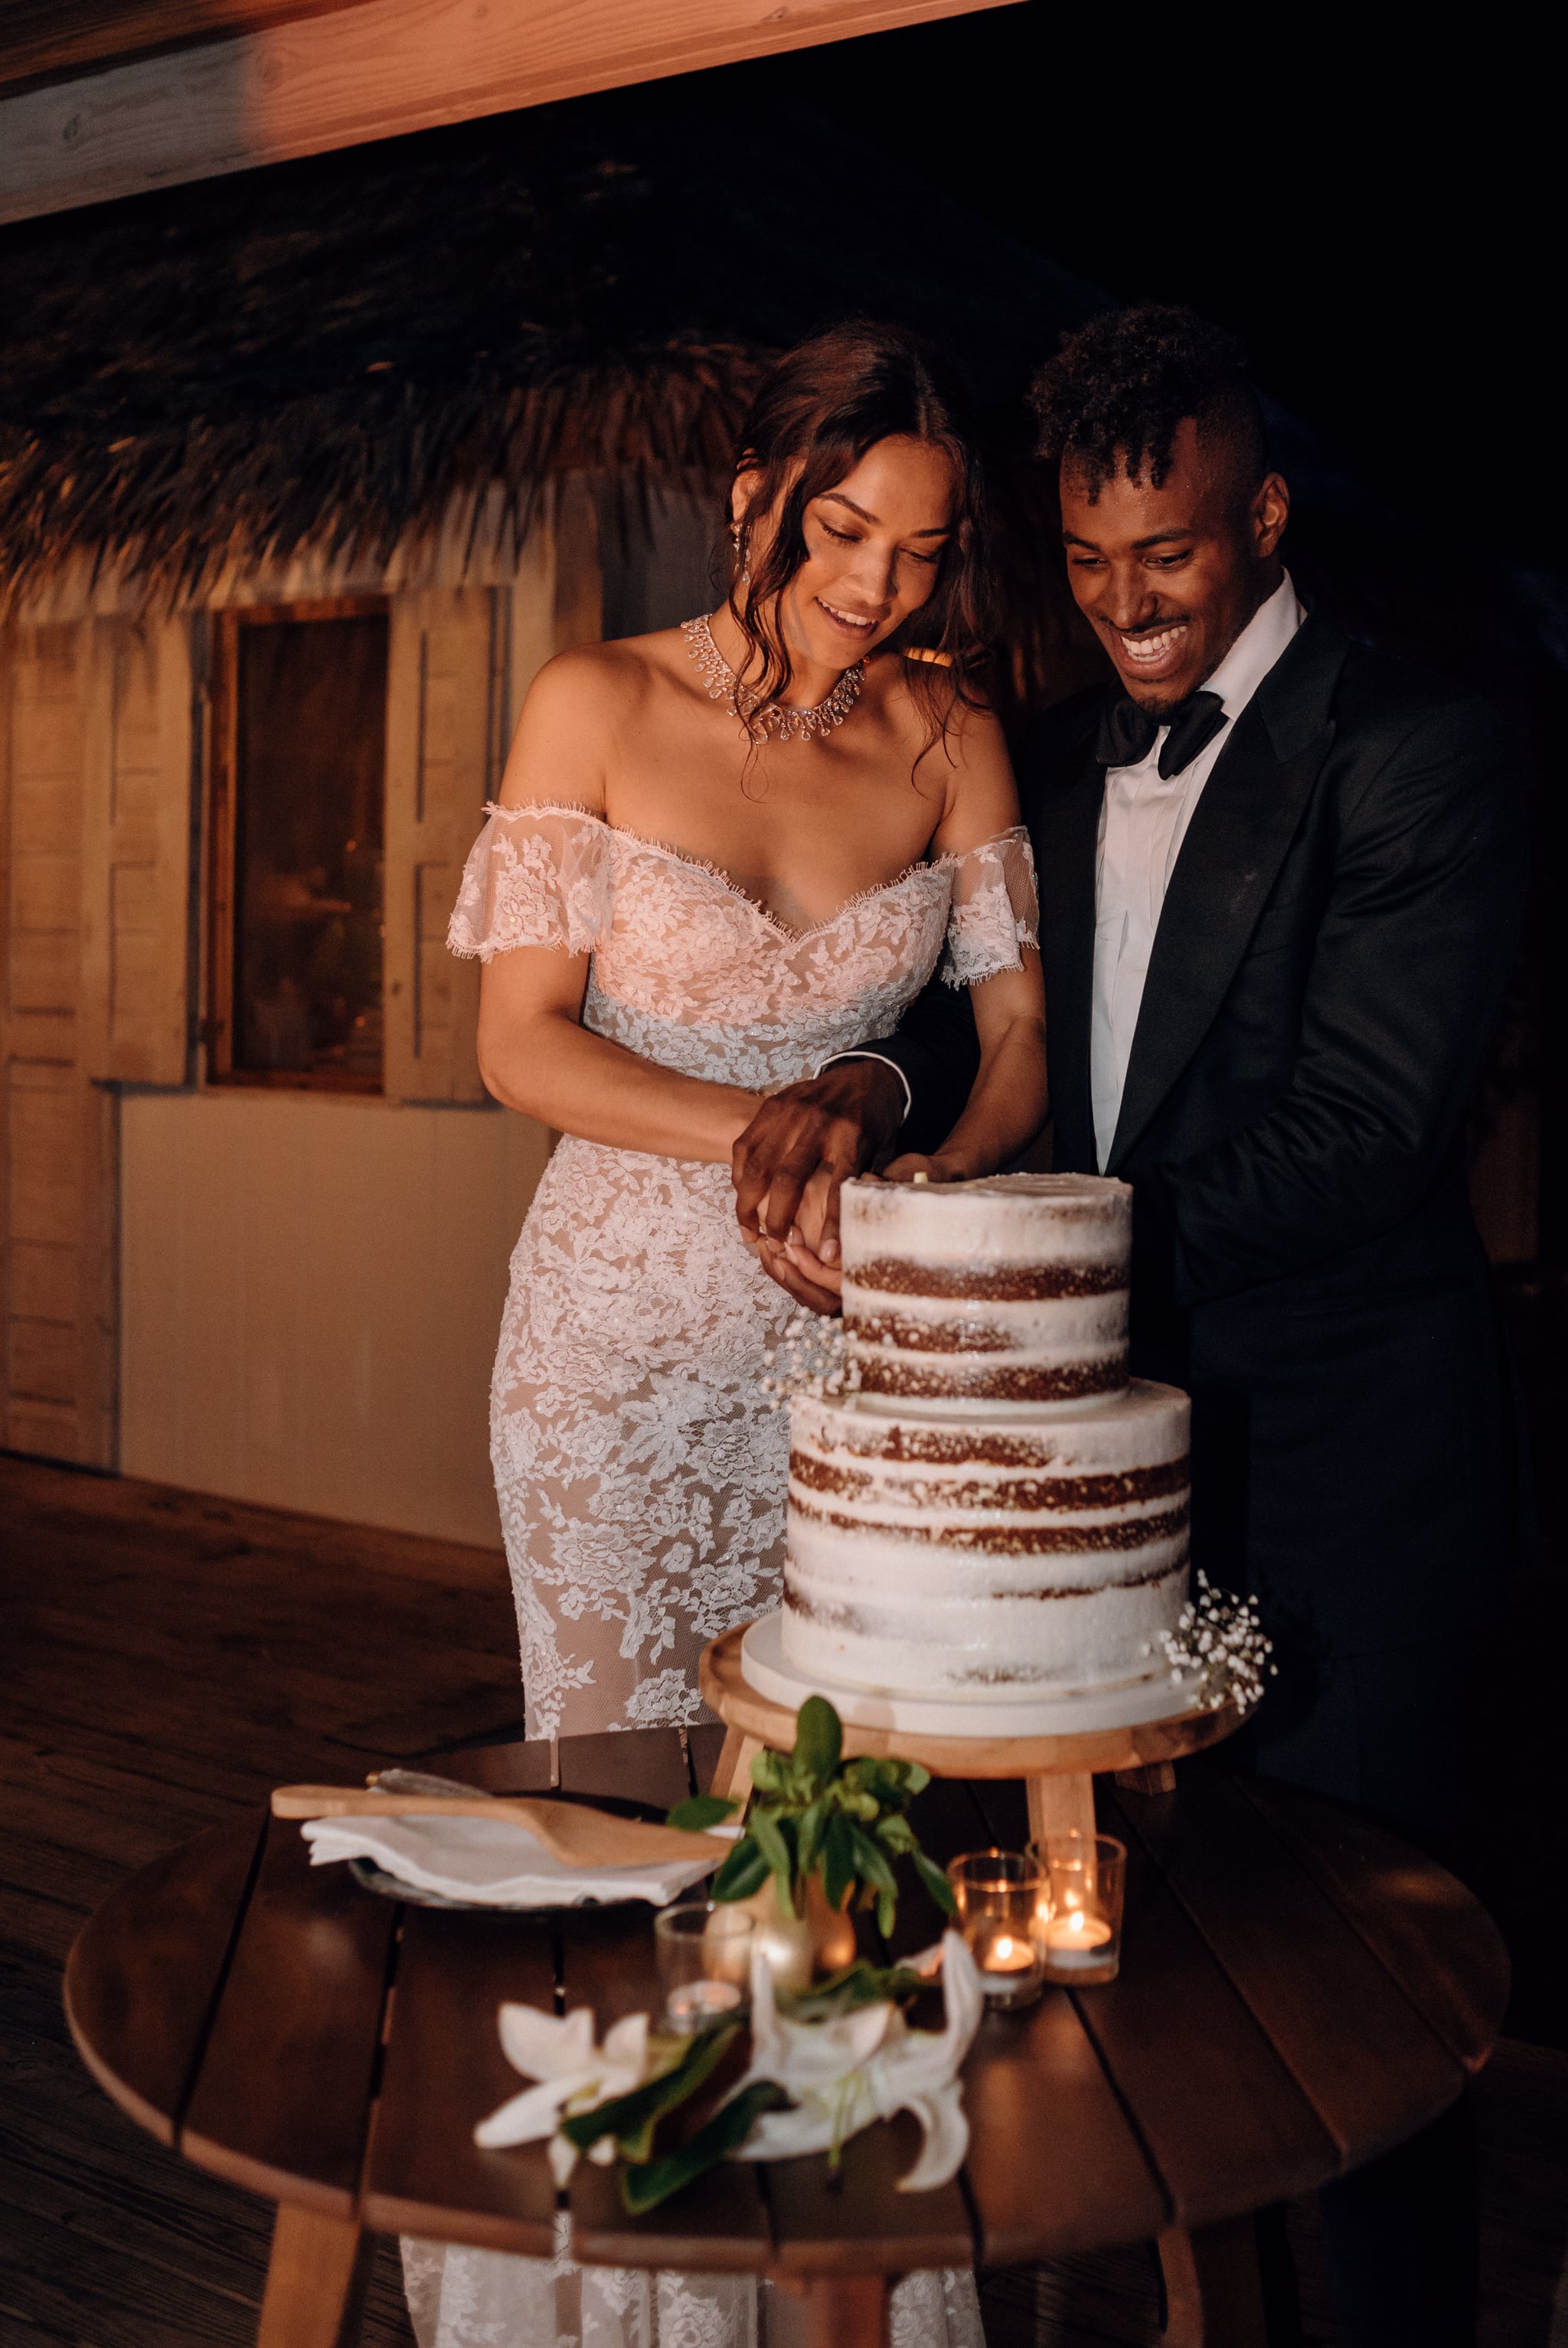 The Groom Wore a Tom Ford Tuxedo | Oh My! This Bride's Supersheer Wedding  Dress Is What Dreams Are Made Of | POPSUGAR Fashion Photo 16